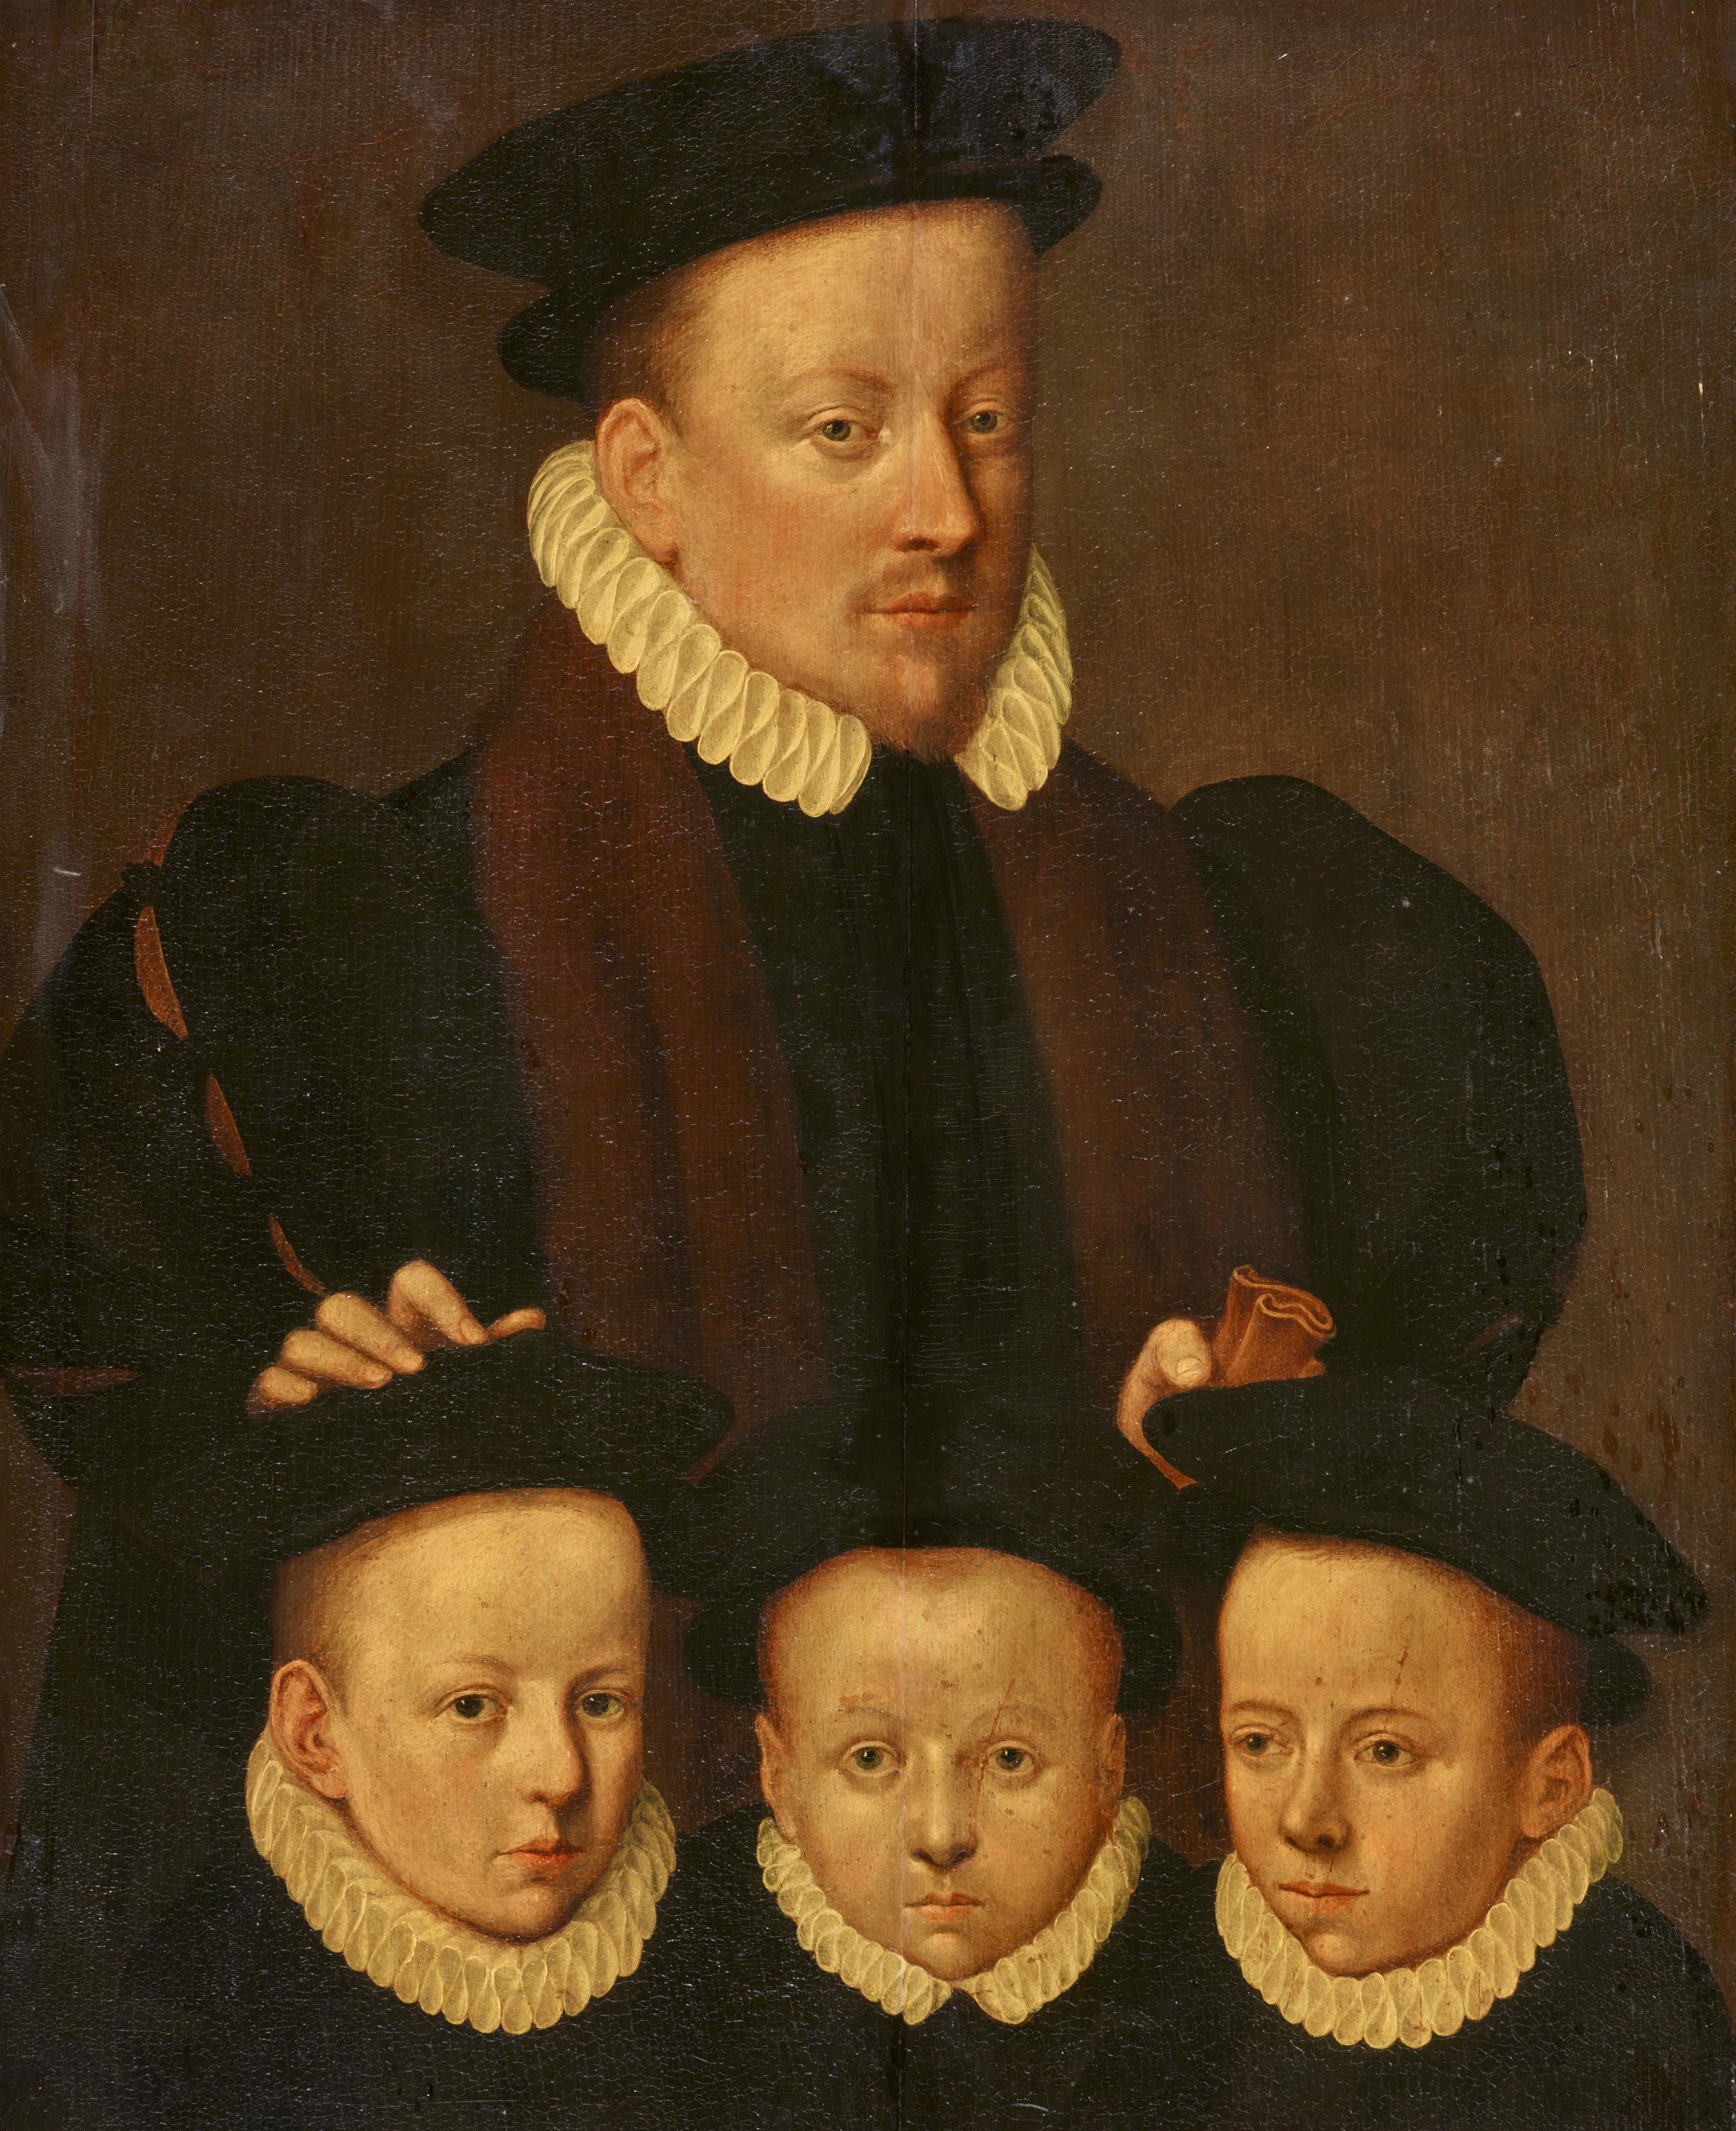 Flemish School 3rd quarter of the 16th century - Portrait of a Man with his Three Sons - image-1